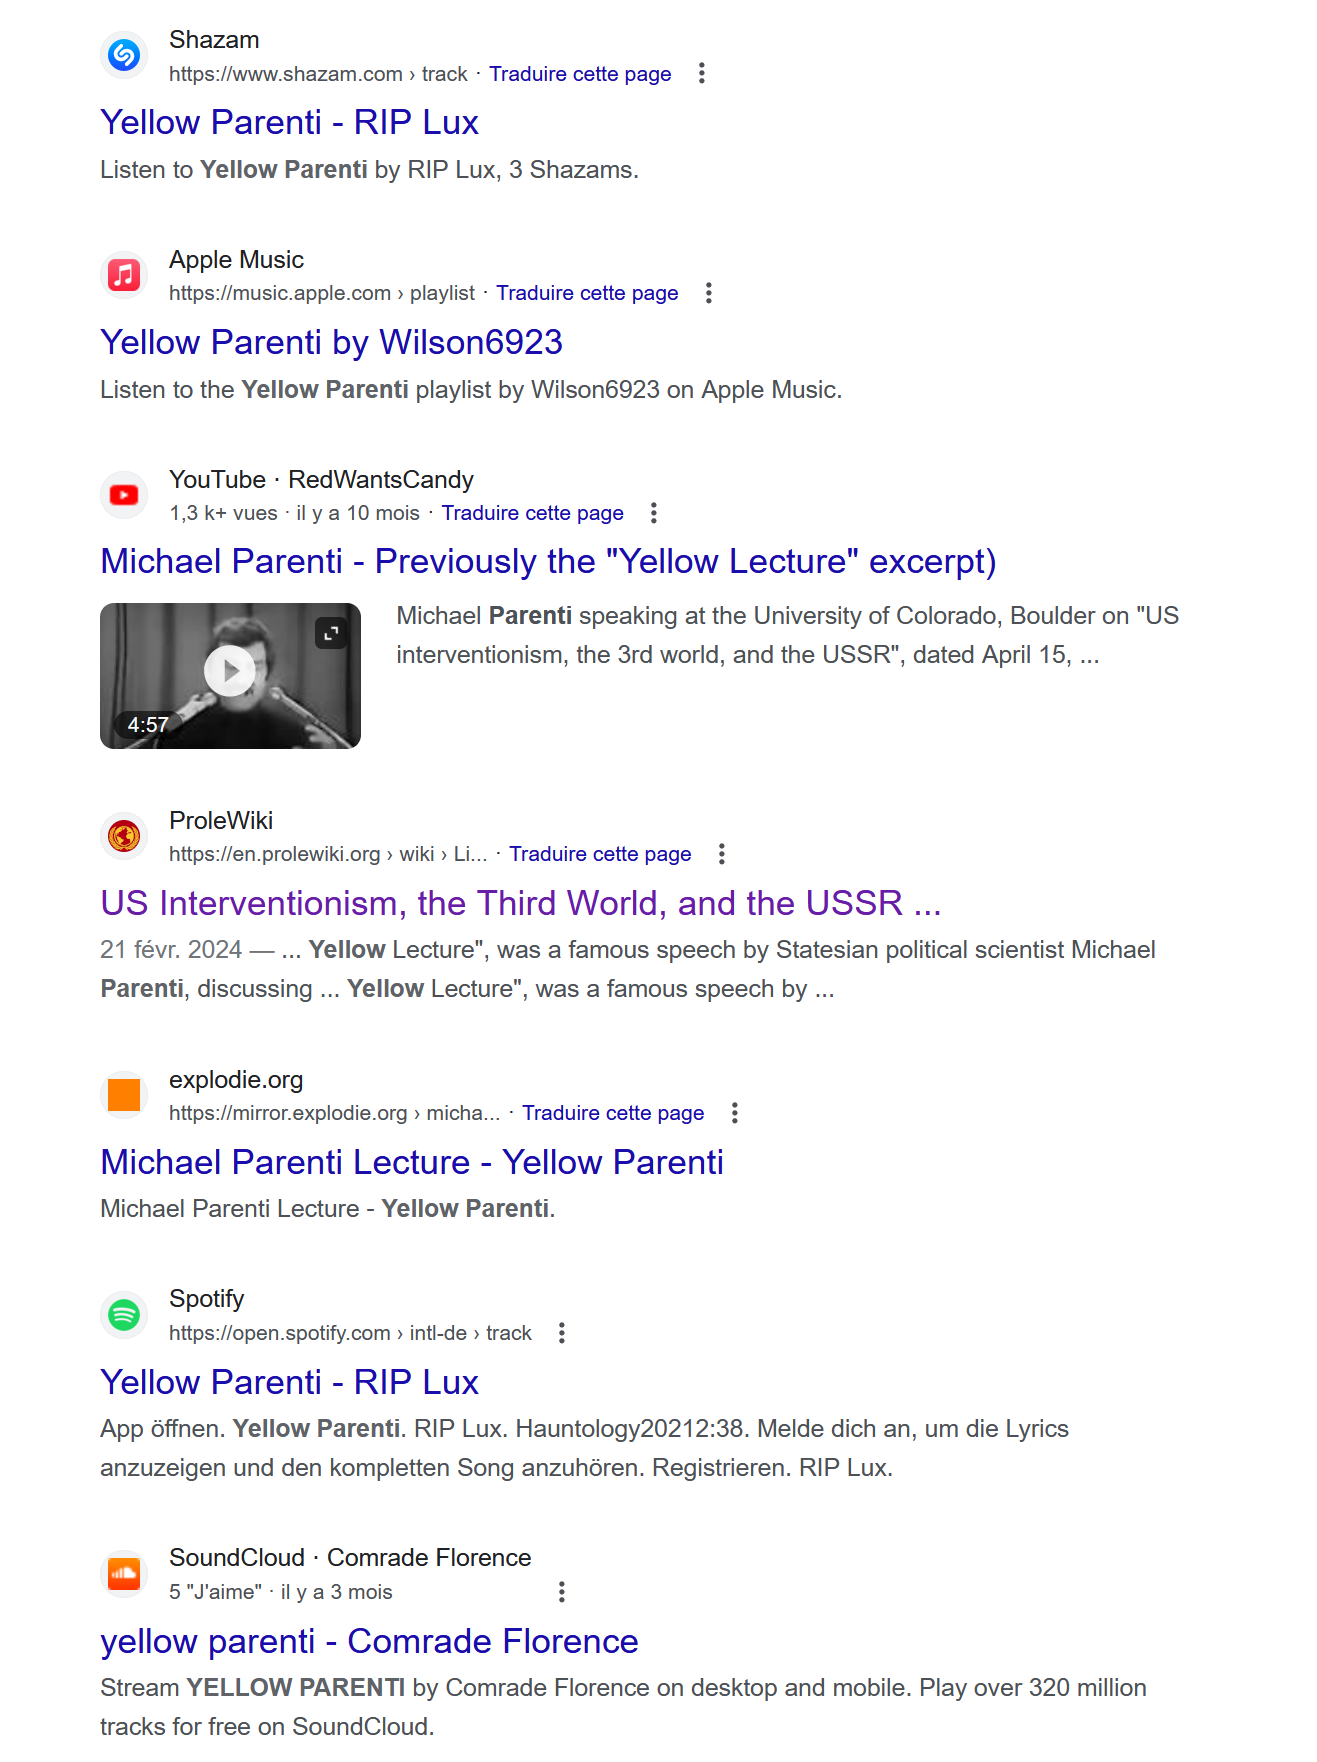 File:Google results for keyword "yellow parenti".png